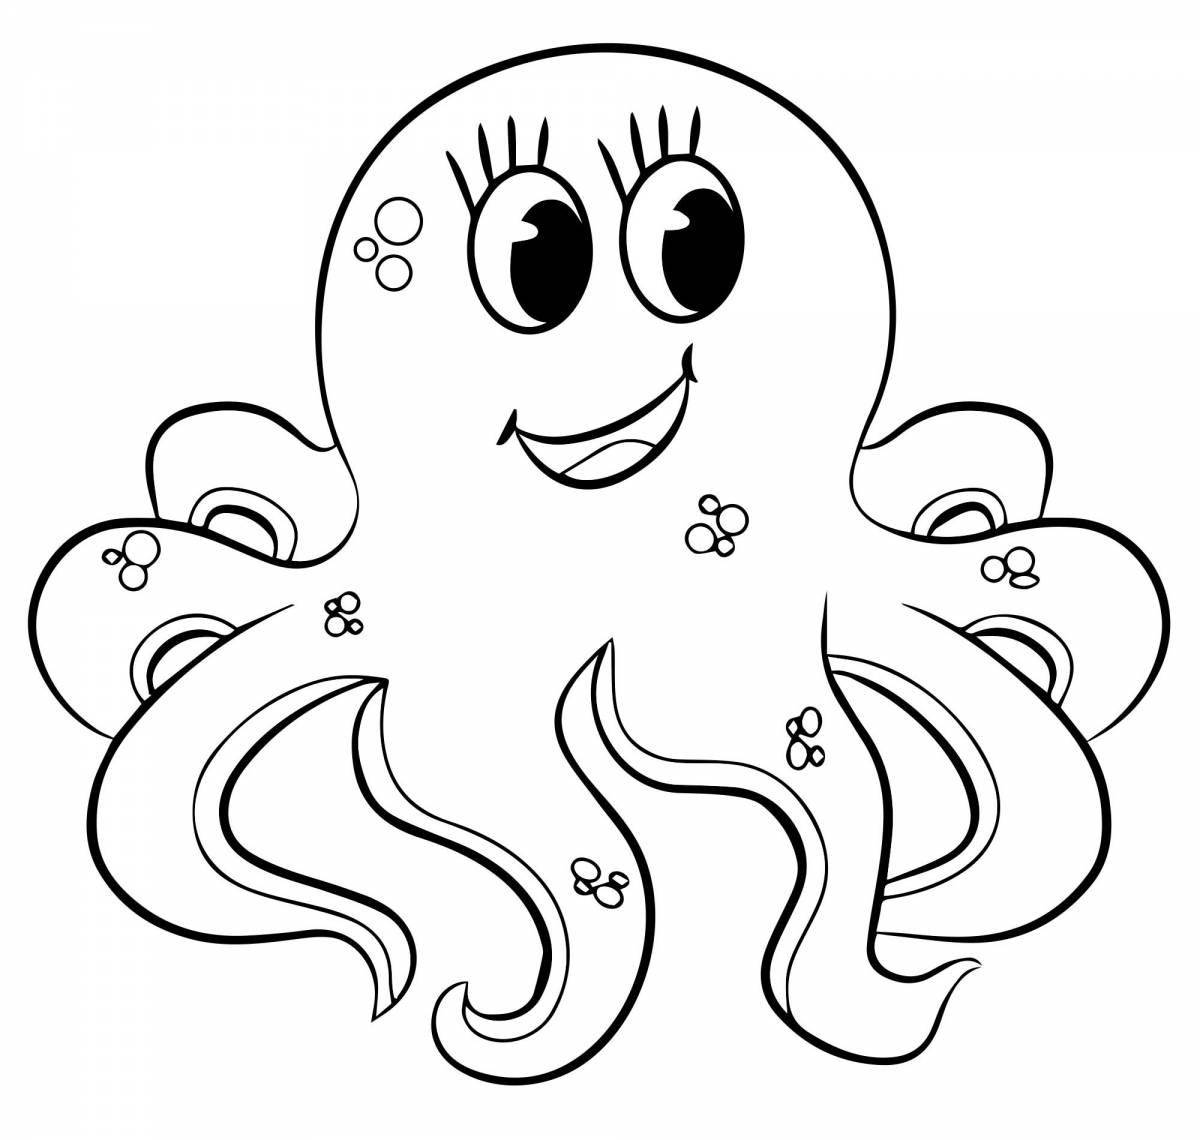 Gorgeous octopus coloring page